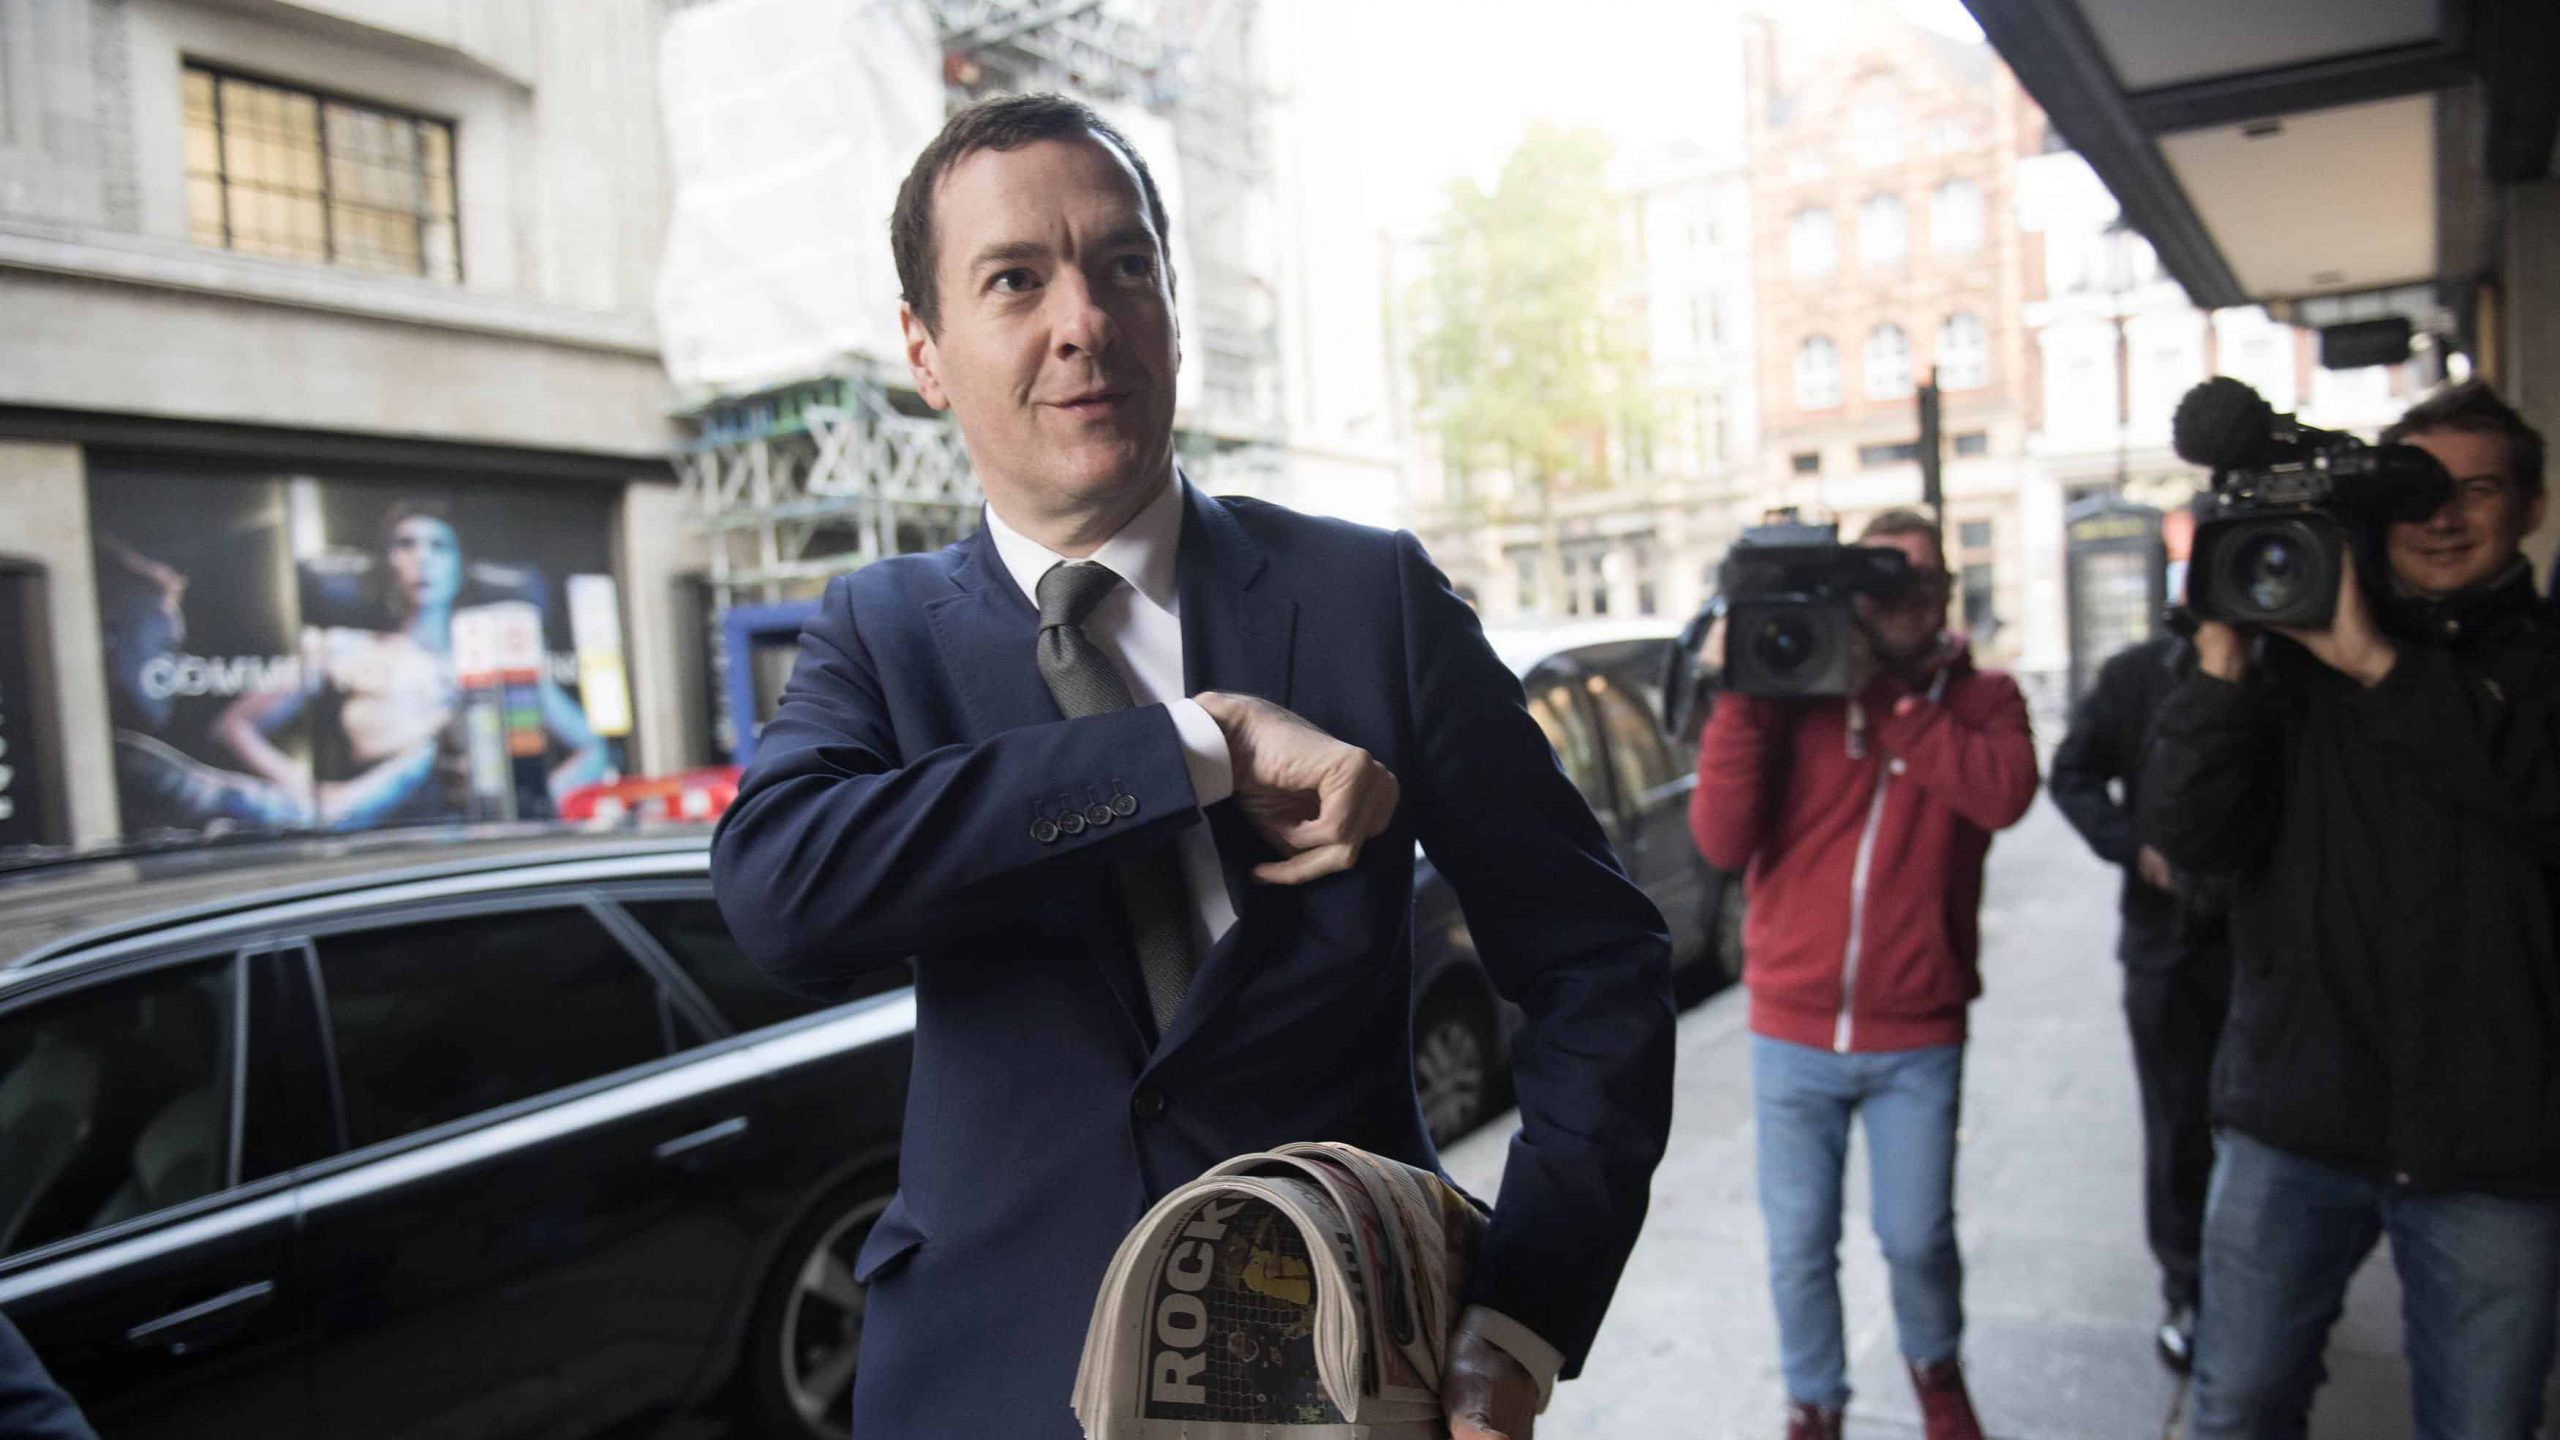 George Osborne considers abandoning Tories for Lib Dems in upcoming election